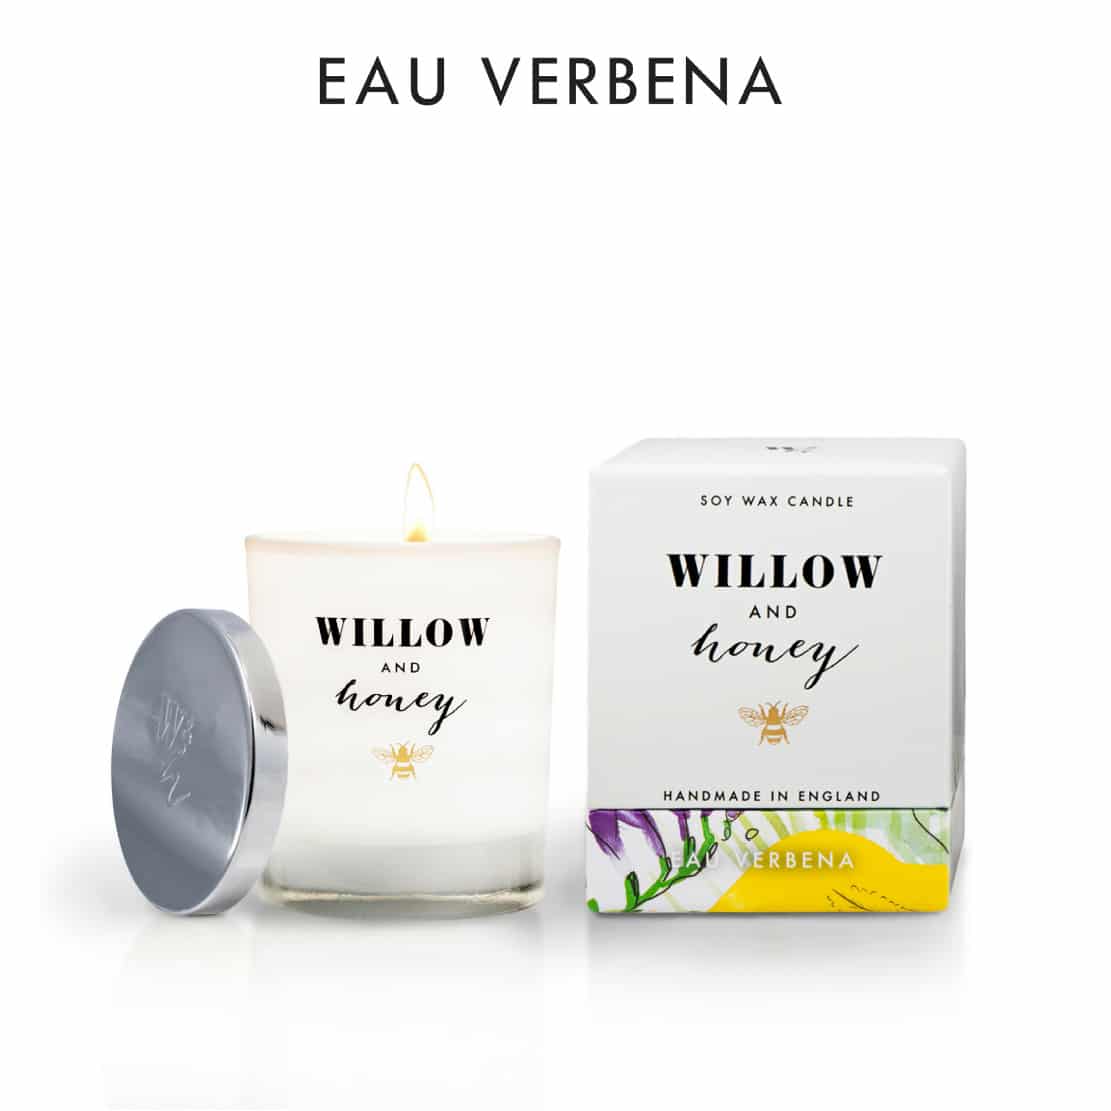 Willow and Honey Eau Verbena Candle 220g